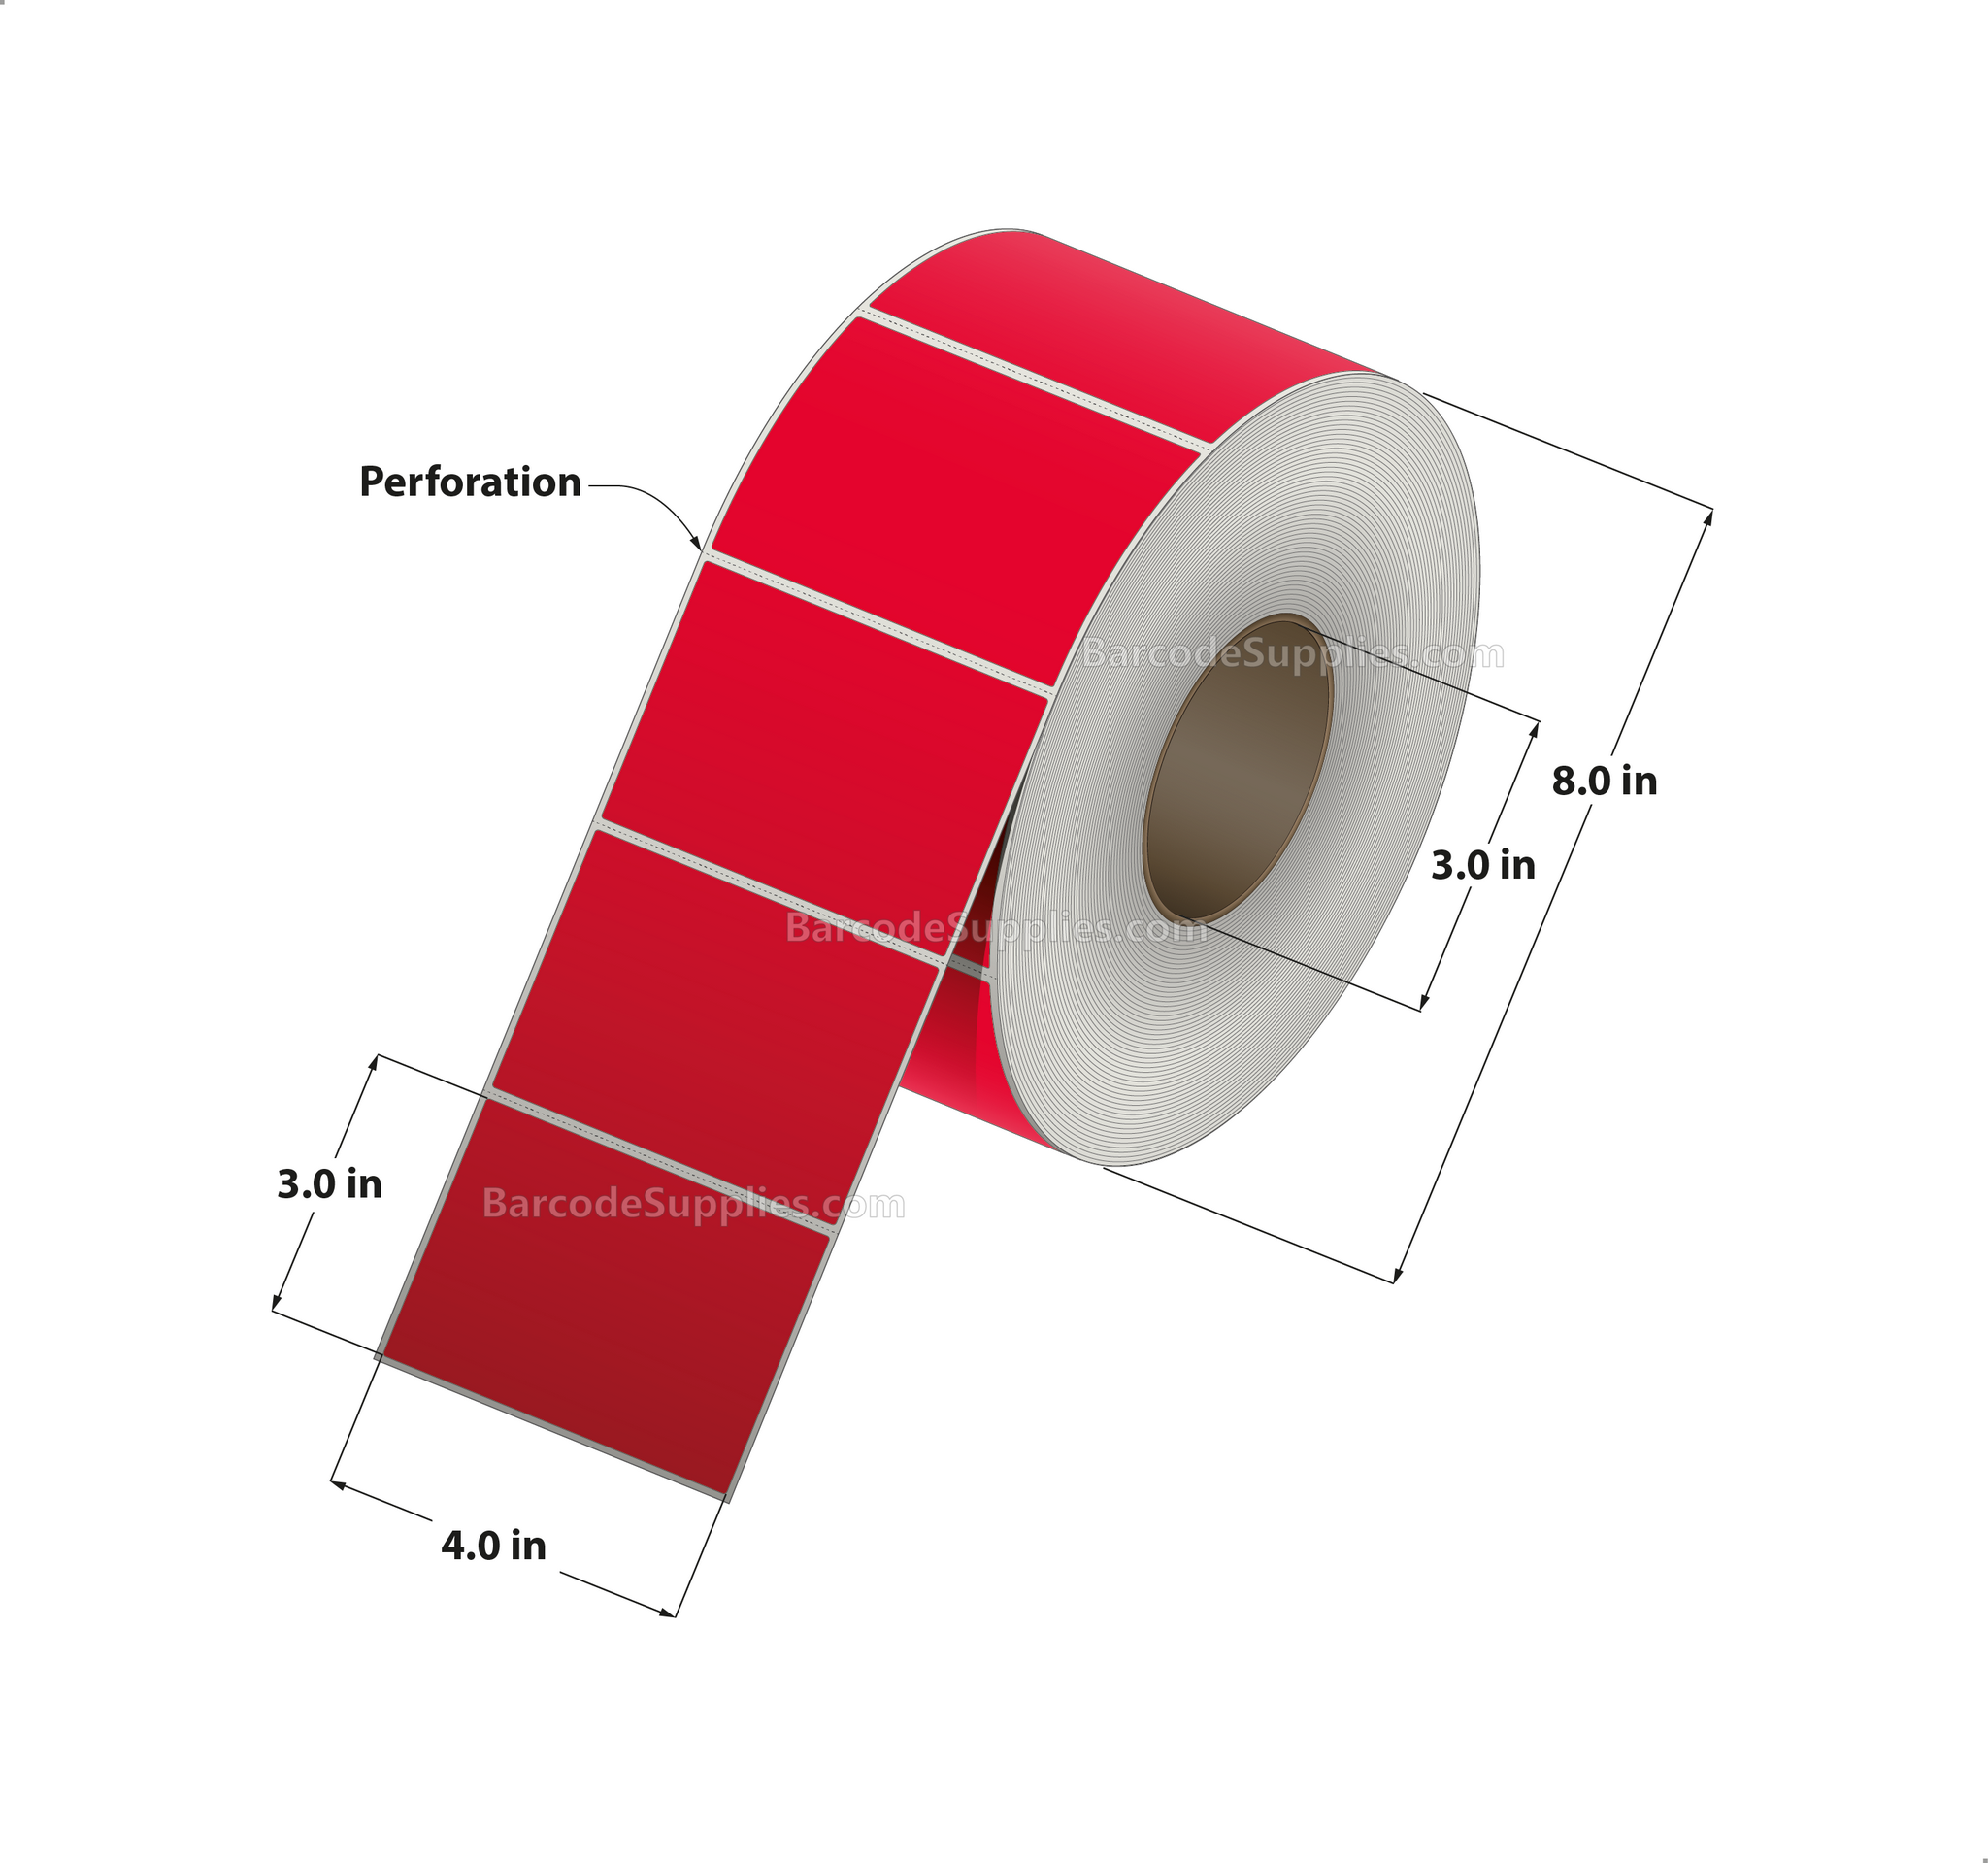 Products 4 x 3 Thermal Transfer 032 Red Labels With Permanent Adhesive - Perforated - 1900 Labels Per Roll - Carton Of 4 Rolls - 7600 Labels Total - MPN: RFC-4-3-1900-RD